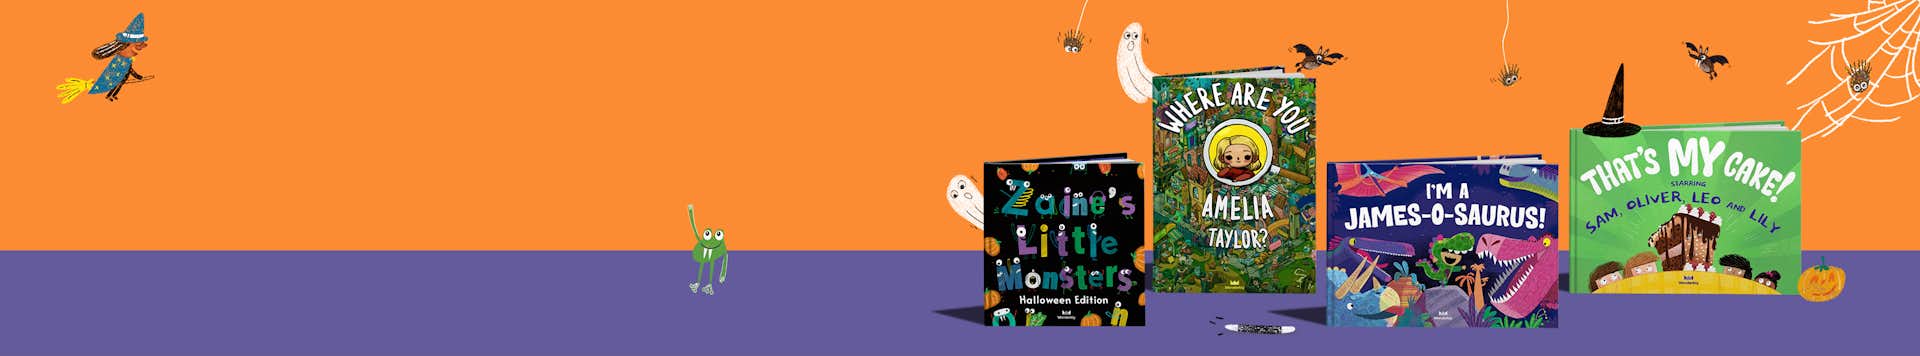 Wonderbly halloween books with spooky themed background (2)